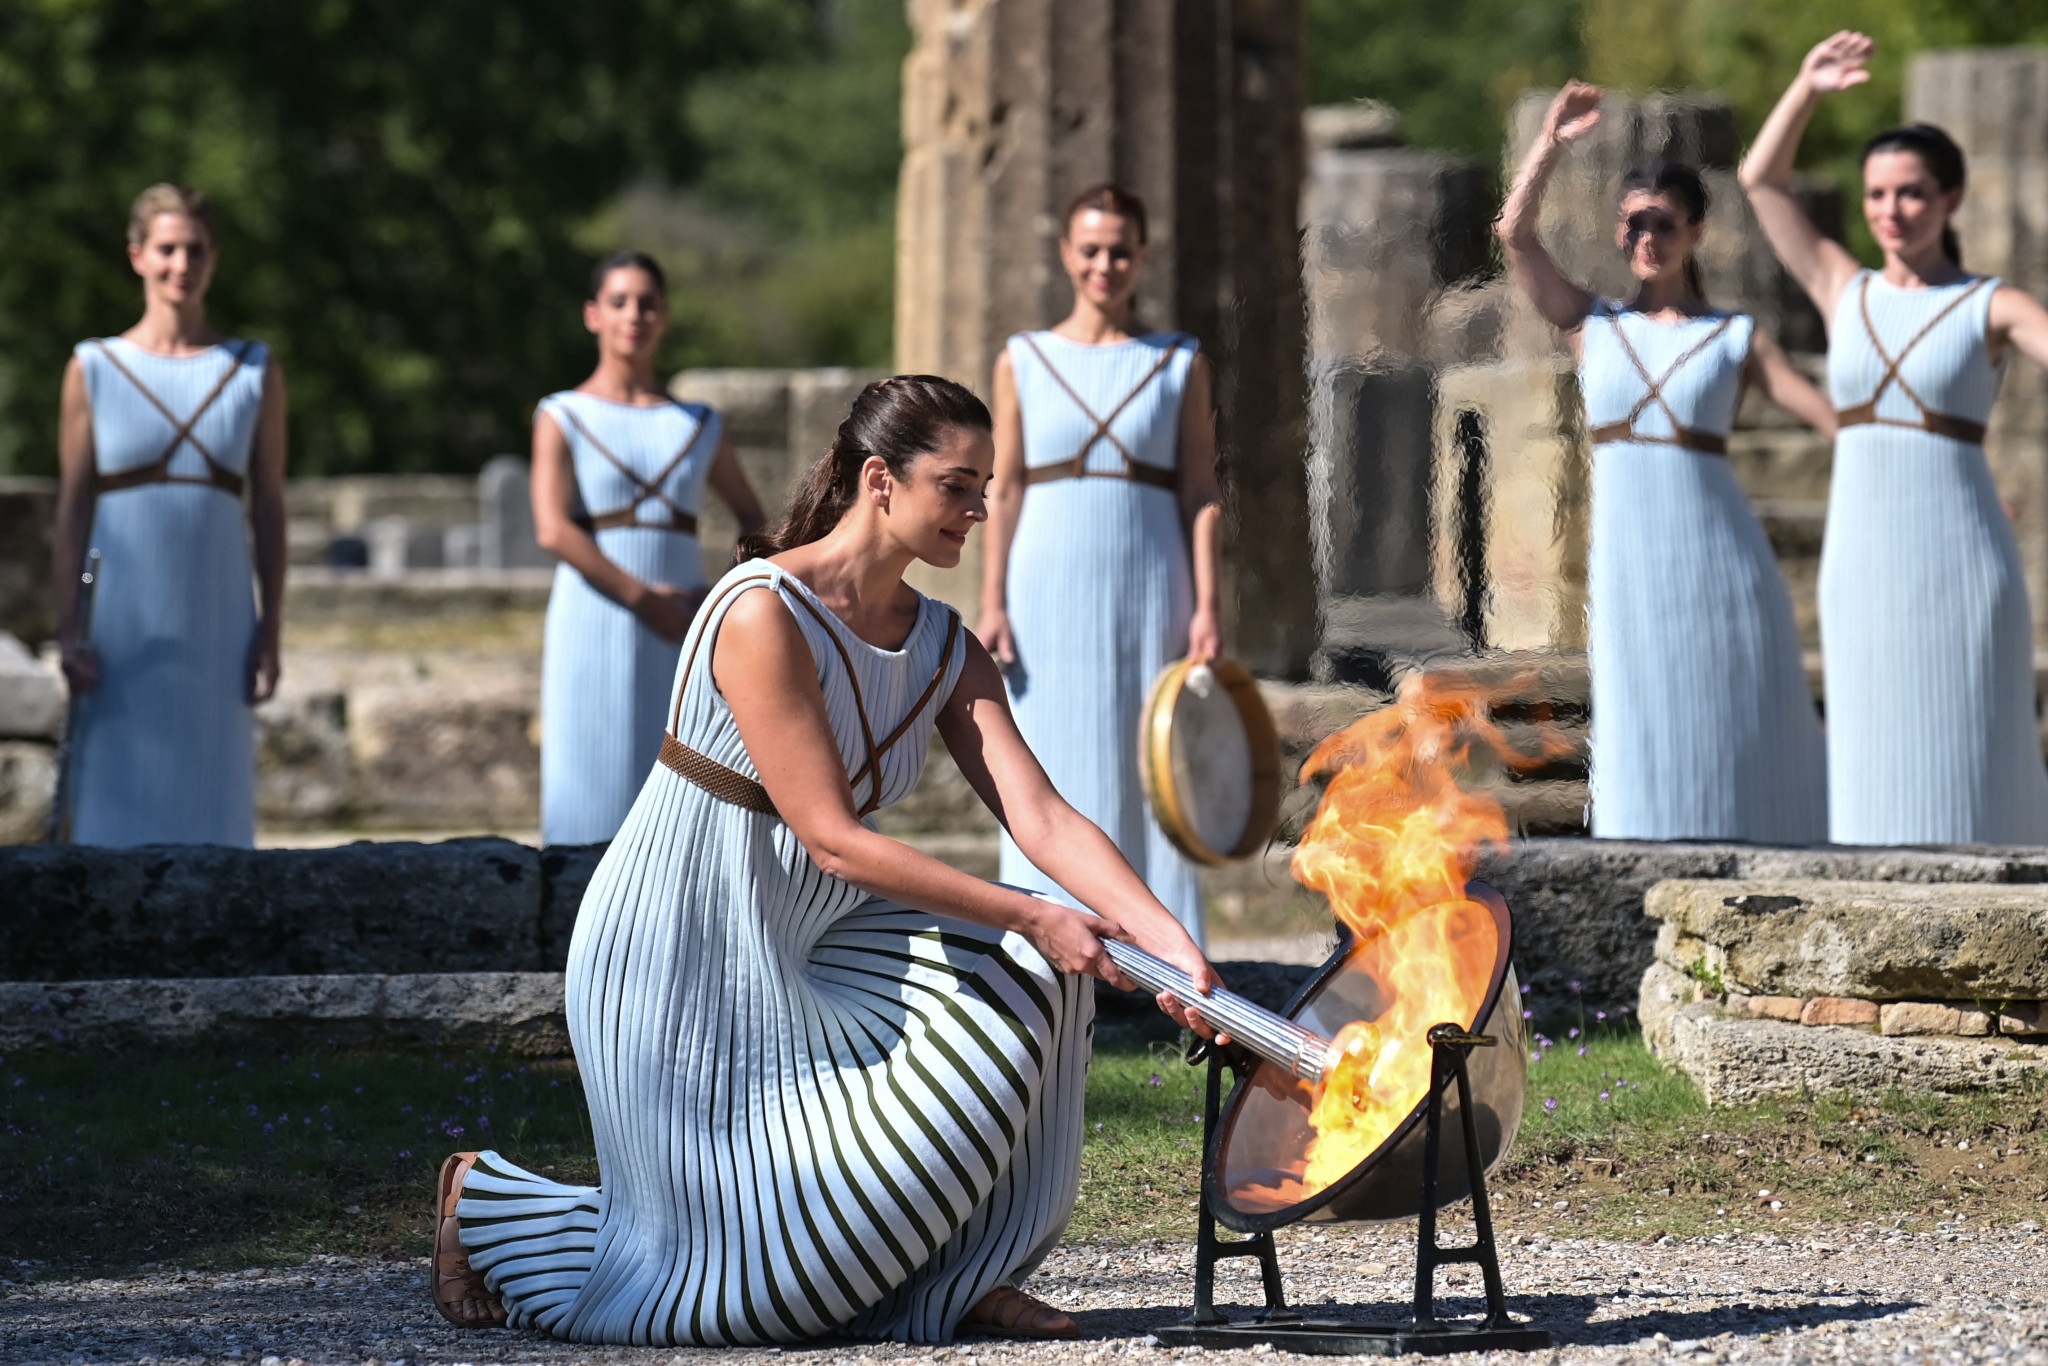 The Flame for Beijing 2022 was lit at Ancient Olympia in an event attended by Greek President Katerina Sakellaropoulou ©Getty Images